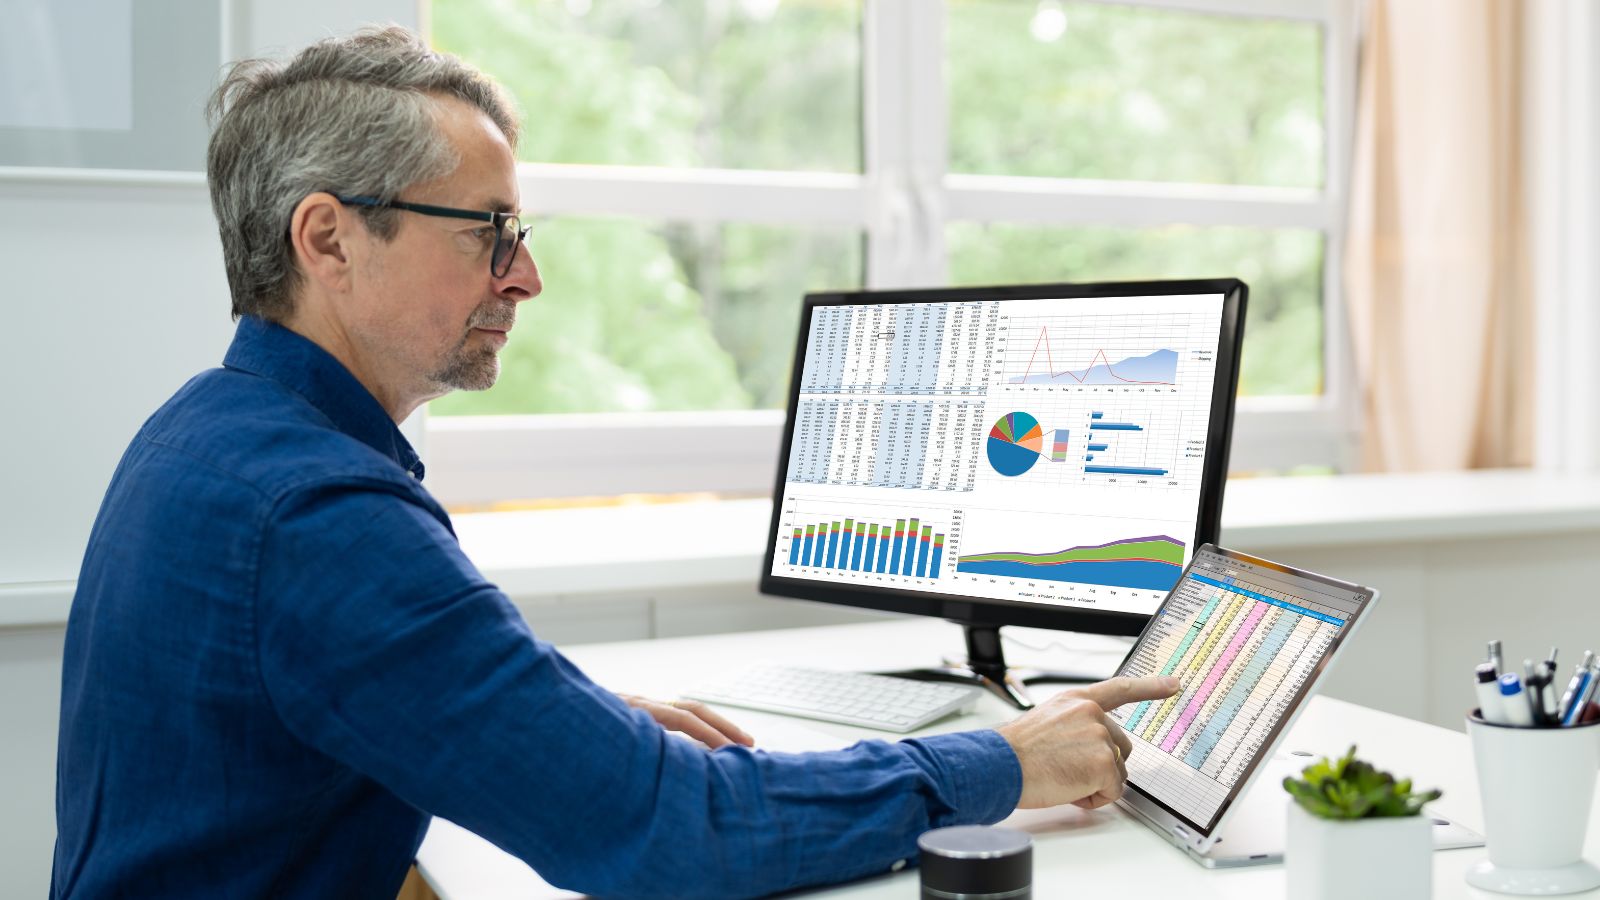 man looking at computer screen with spreadsheets